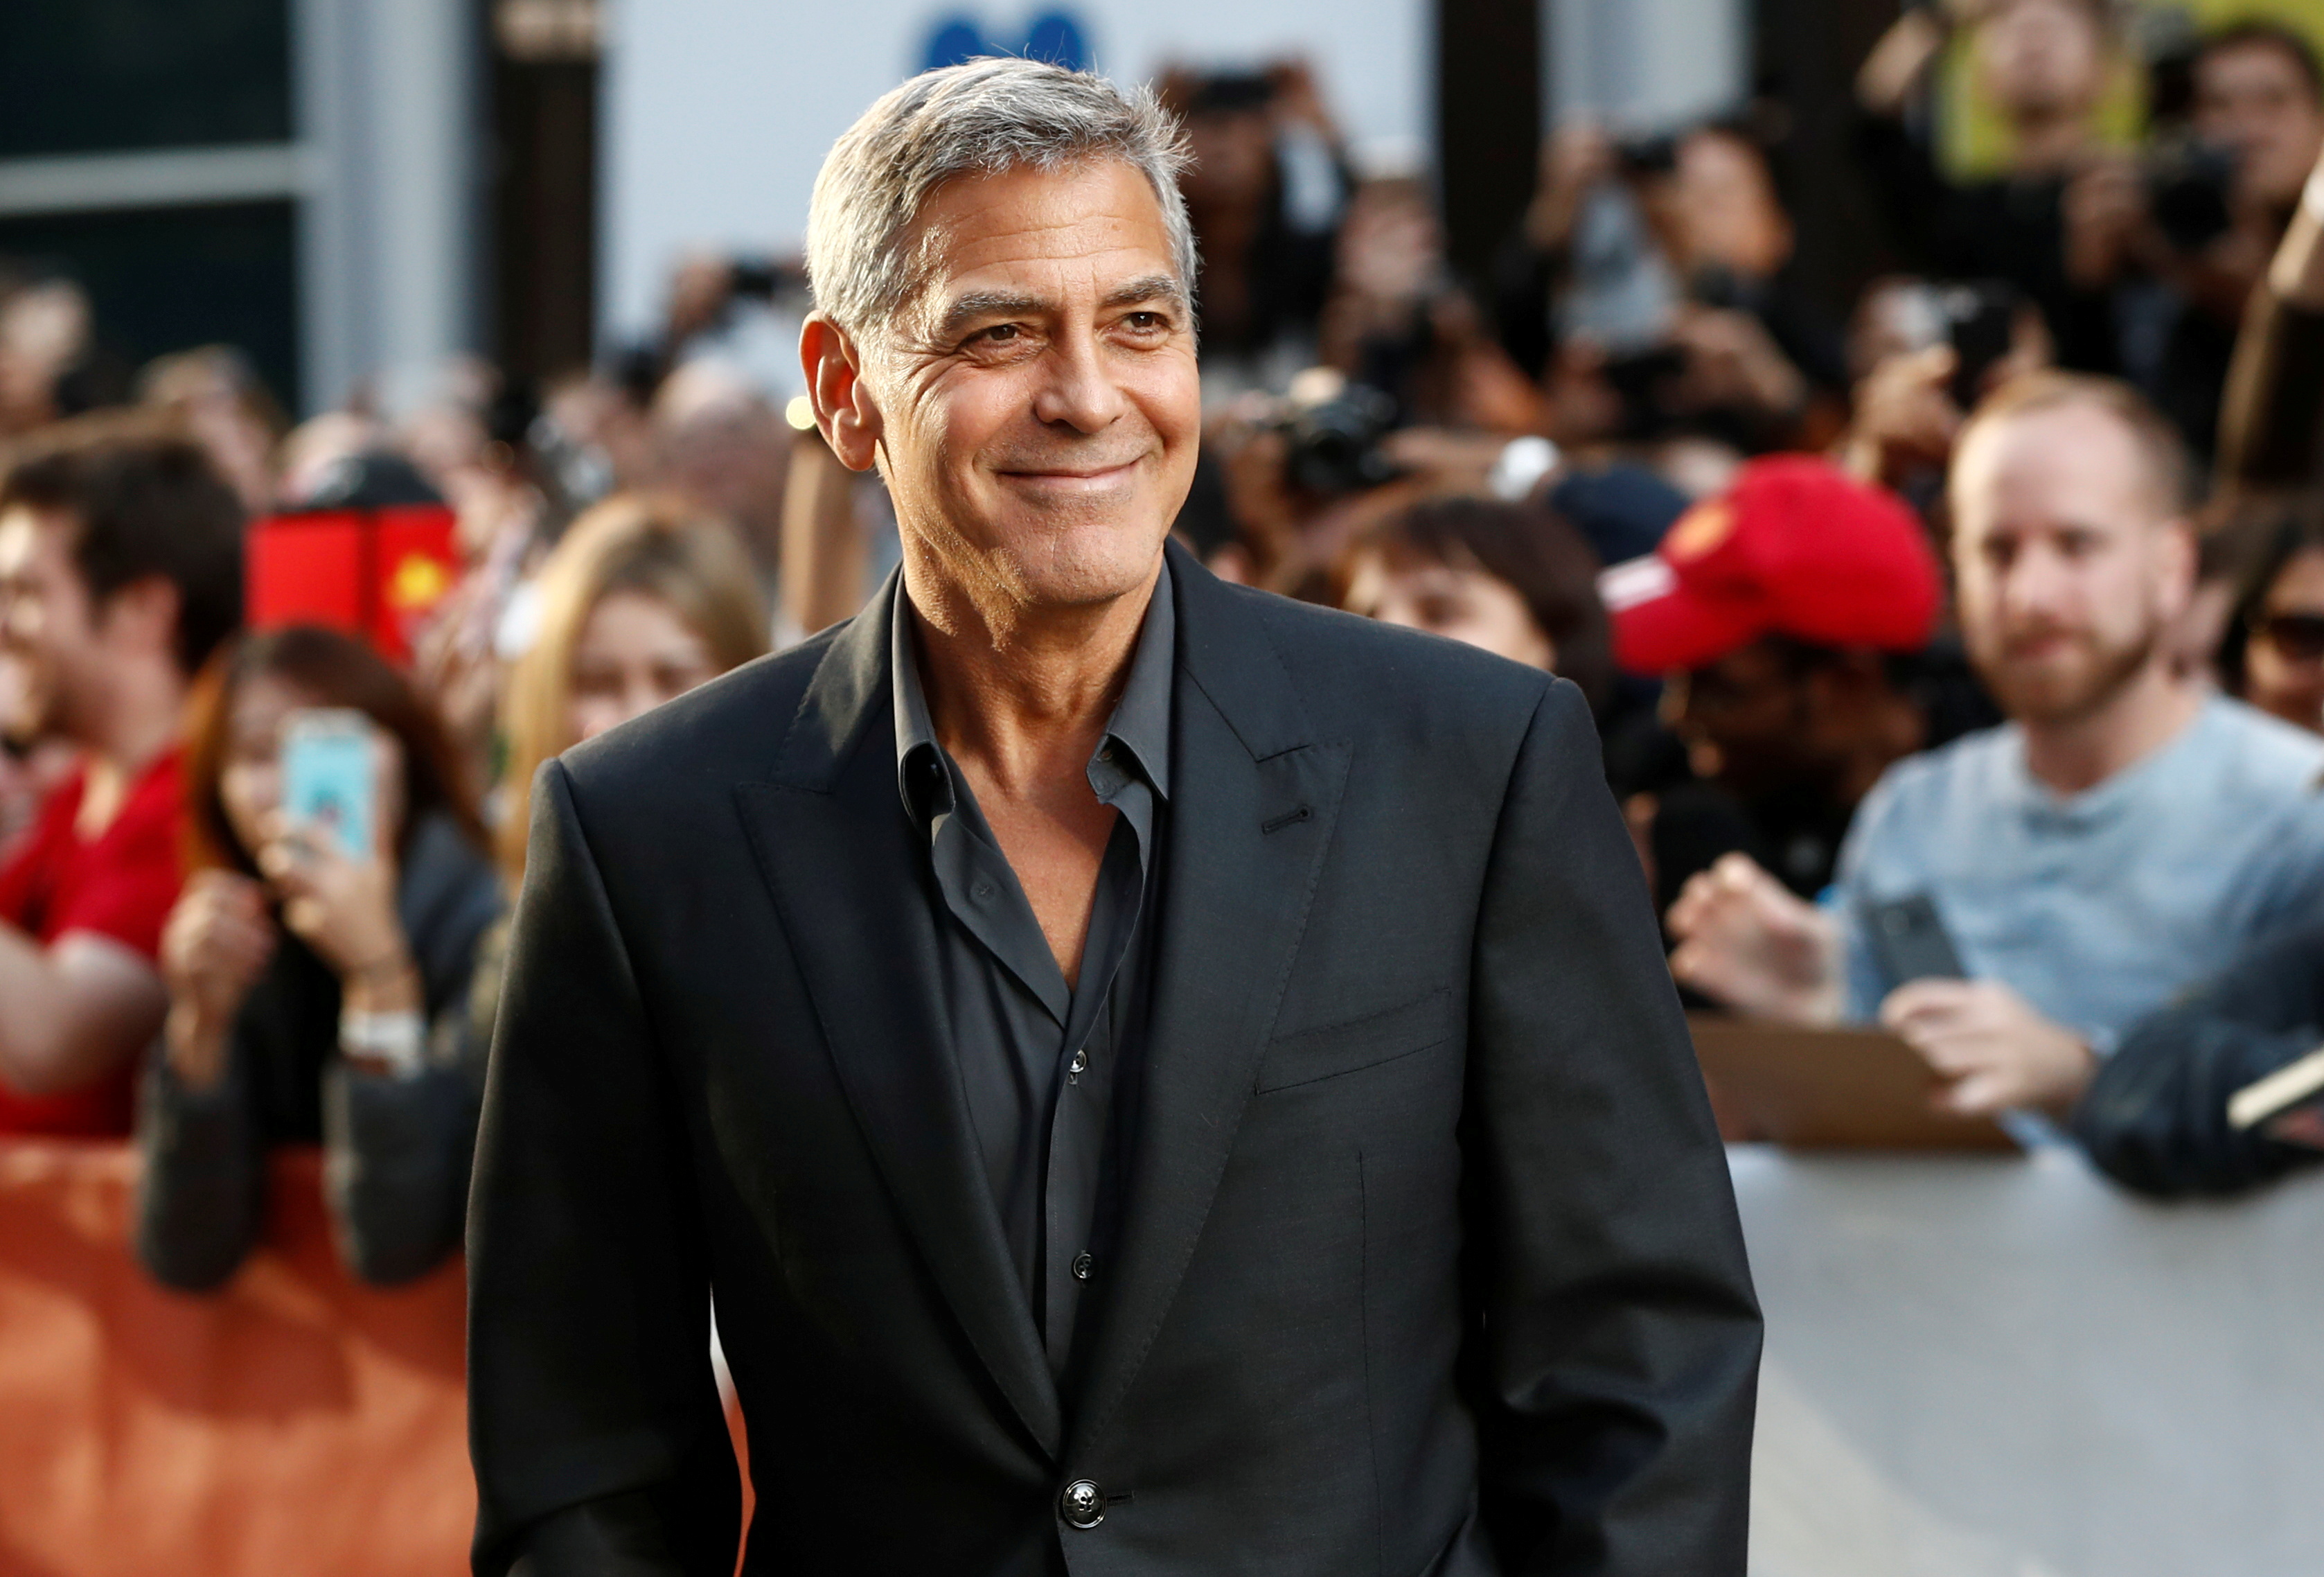 Clooney arrives on the red carpet for the film 